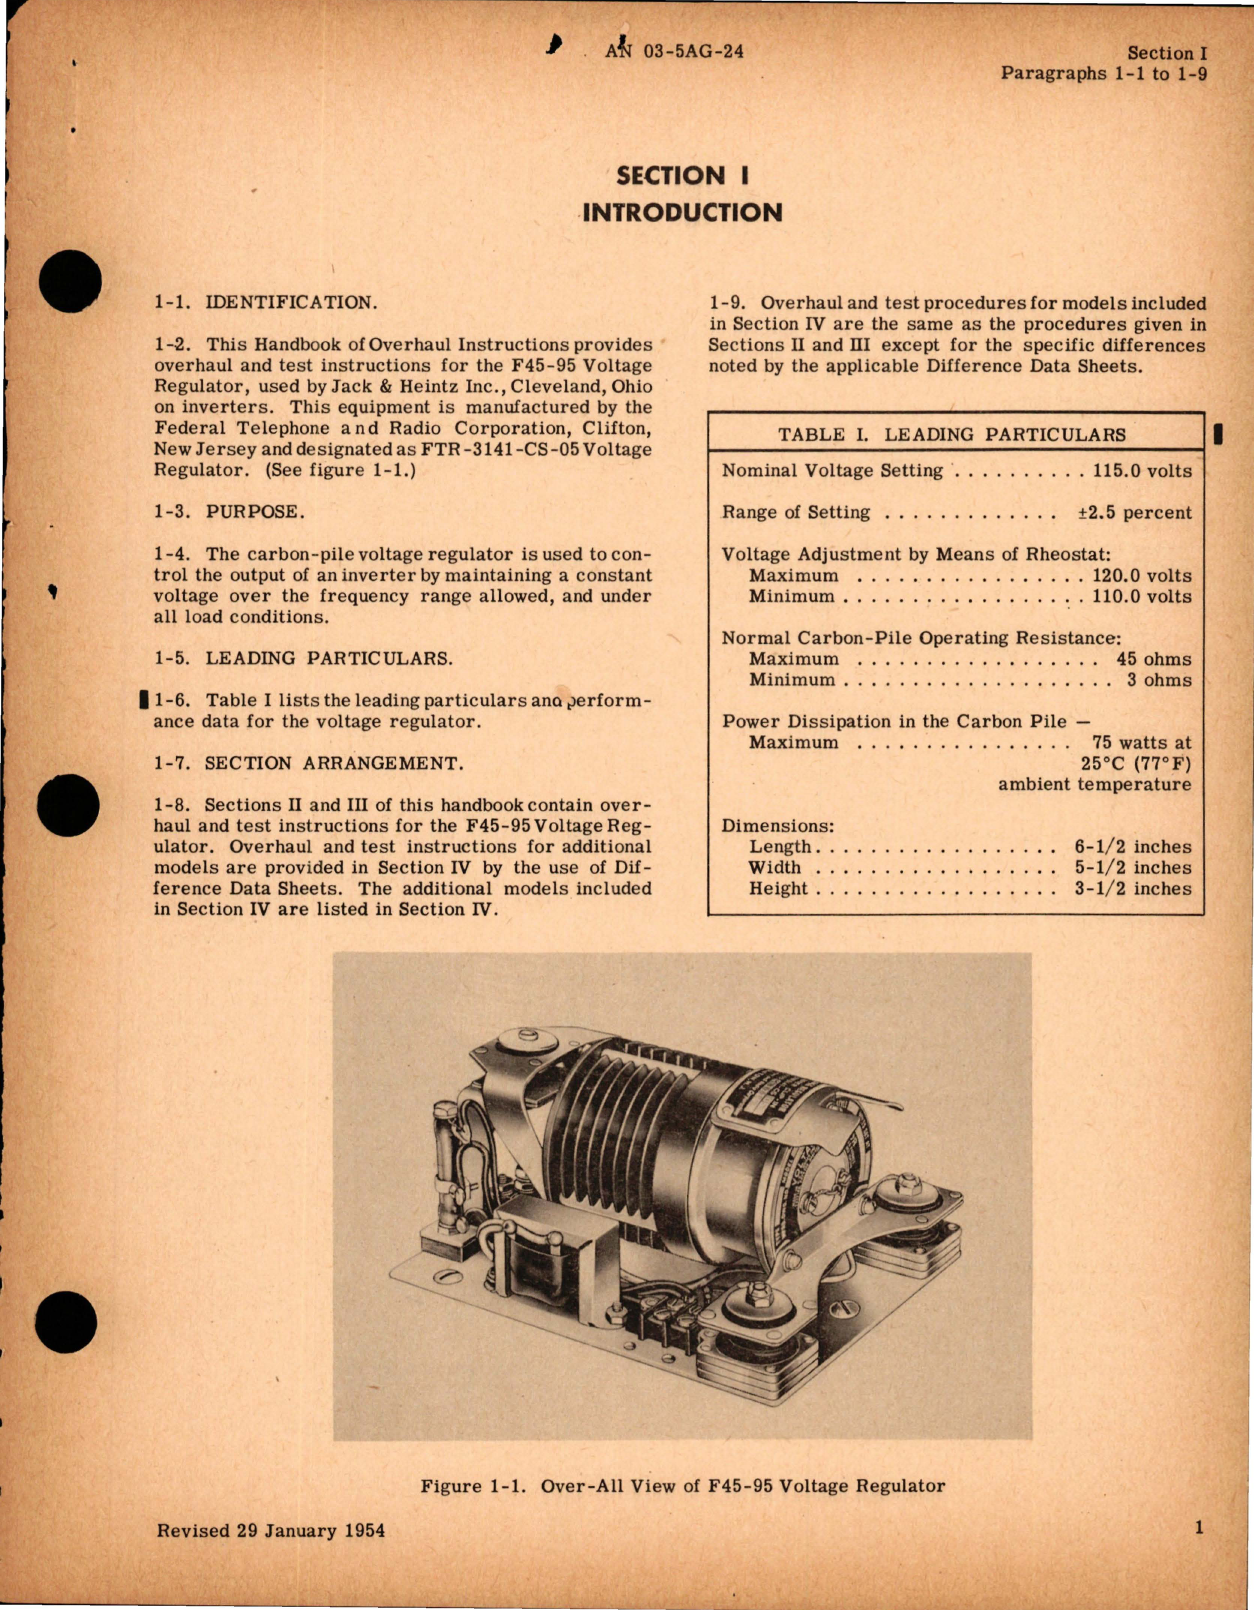 Sample page 5 from AirCorps Library document: Overhaul Instructions for Voltage Regulators - Models F36-70, F45-51, F45-90, F45-95, F49-70, and JH12999-3